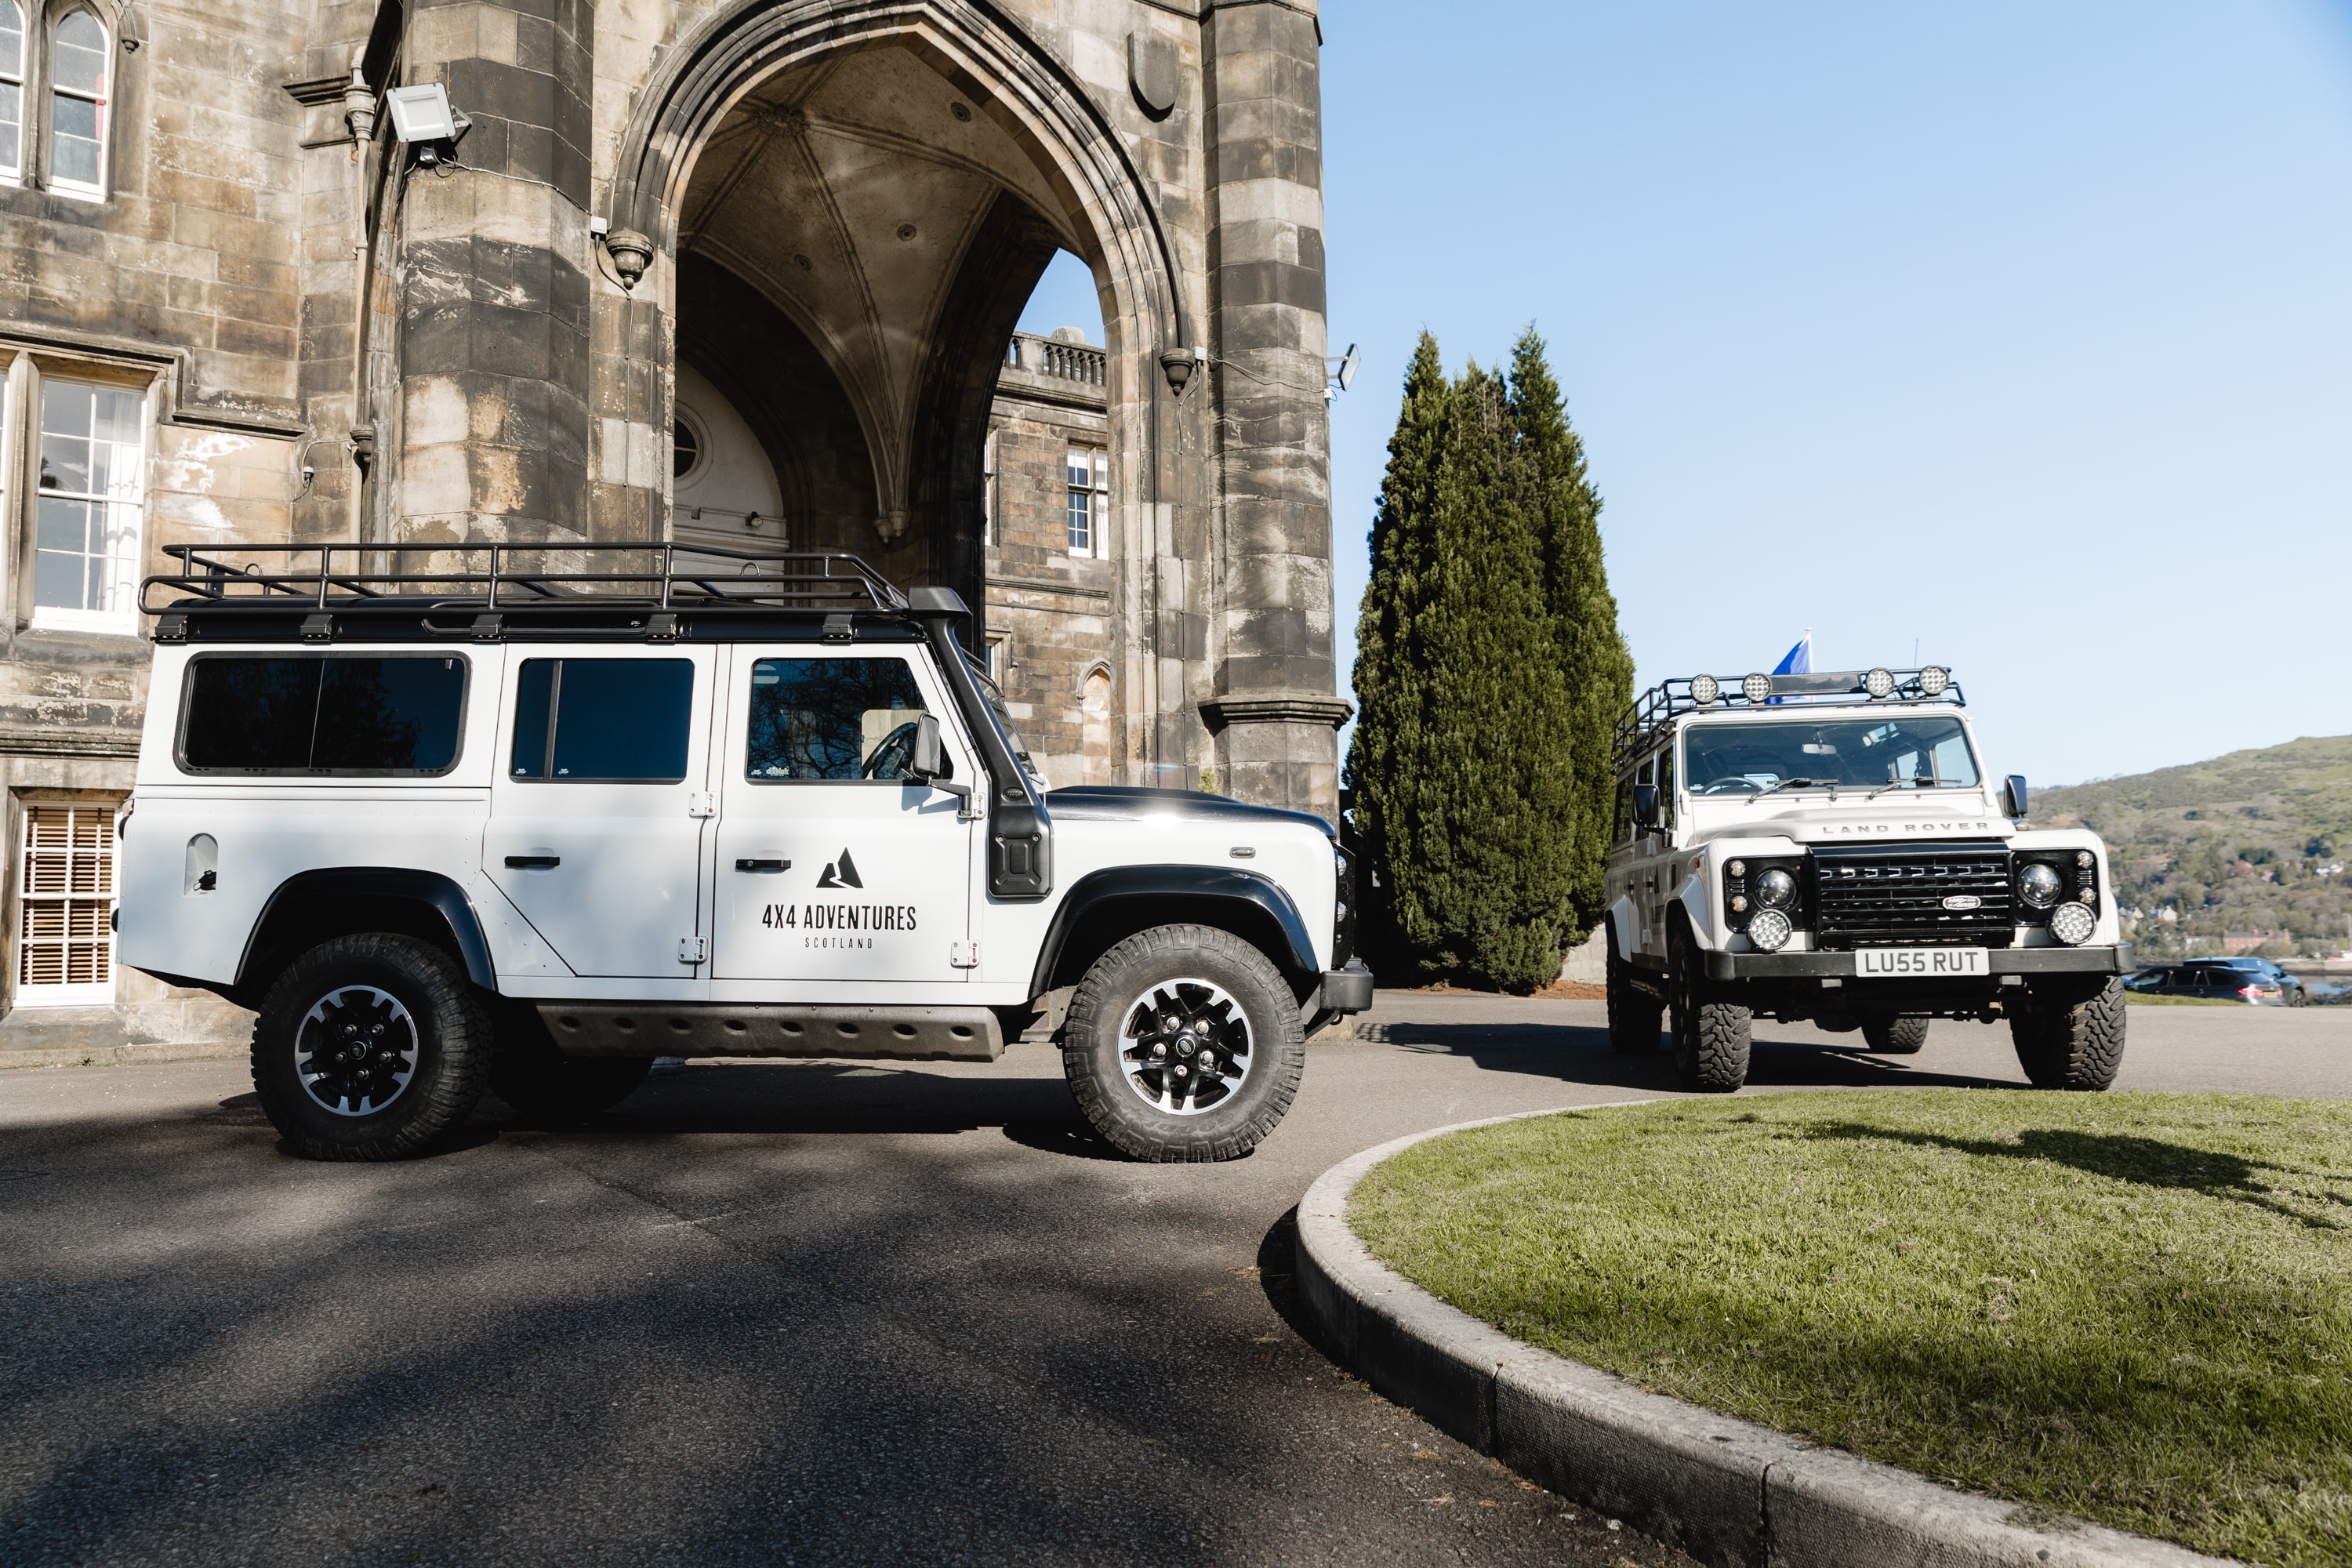 Mar Hall takes luxury hospitality to new heights with off-road adventures